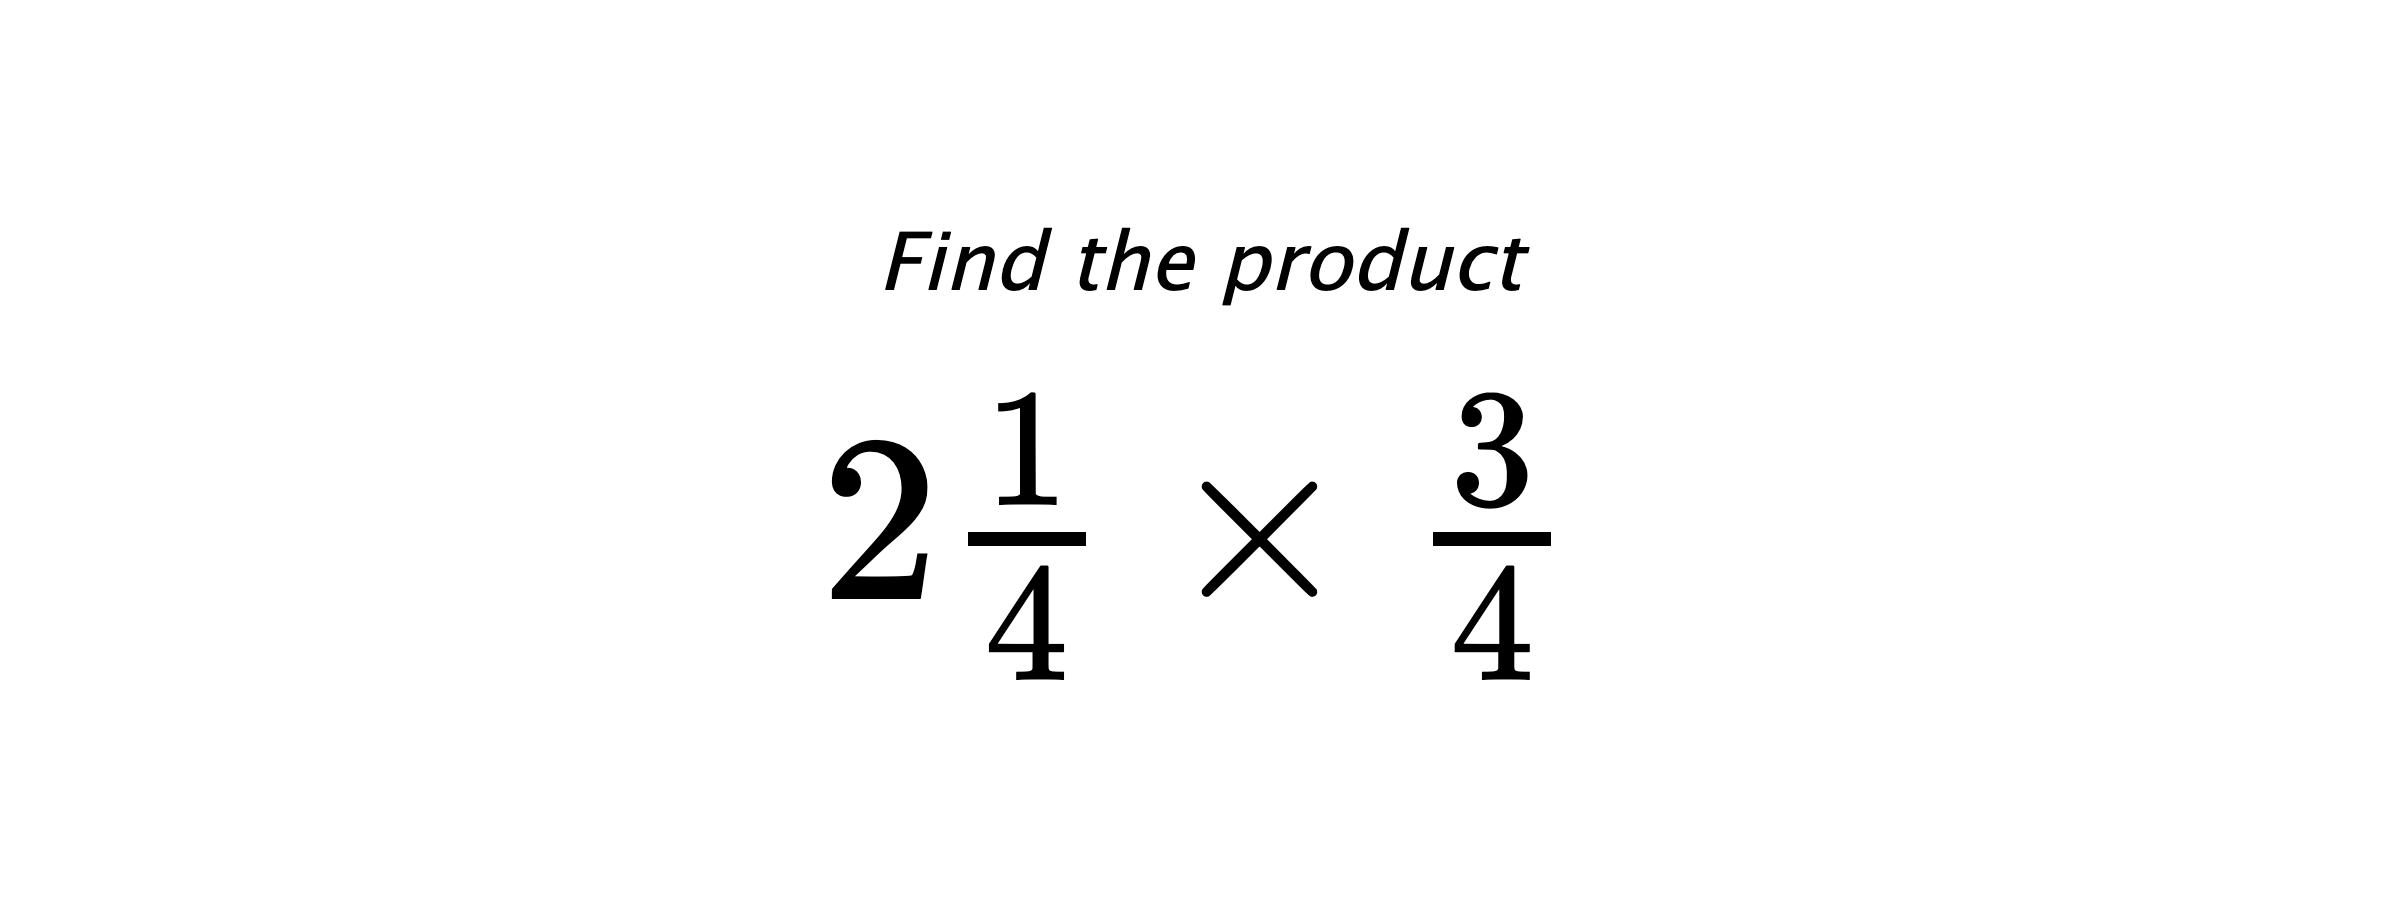 Find the product $ 2\frac{1}{4} \times \frac{3}{4} $